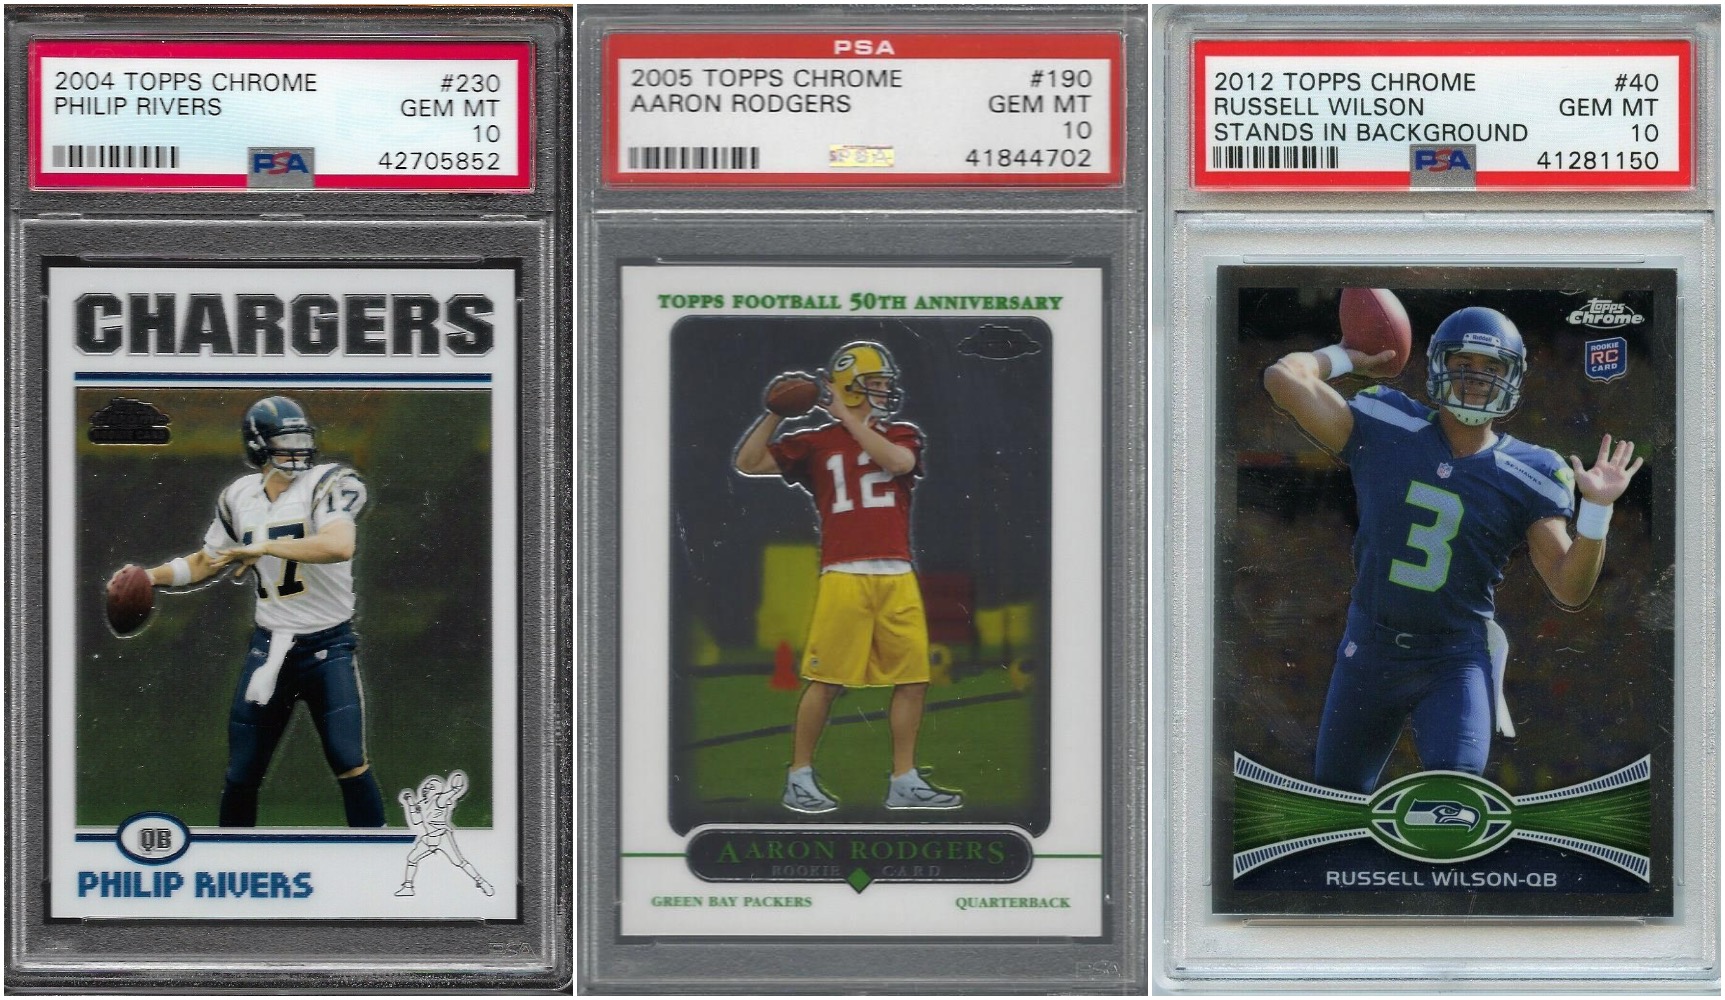 Three sports trading card images: Philip Rivers, Aaron Rodgers, and Russell Wilson